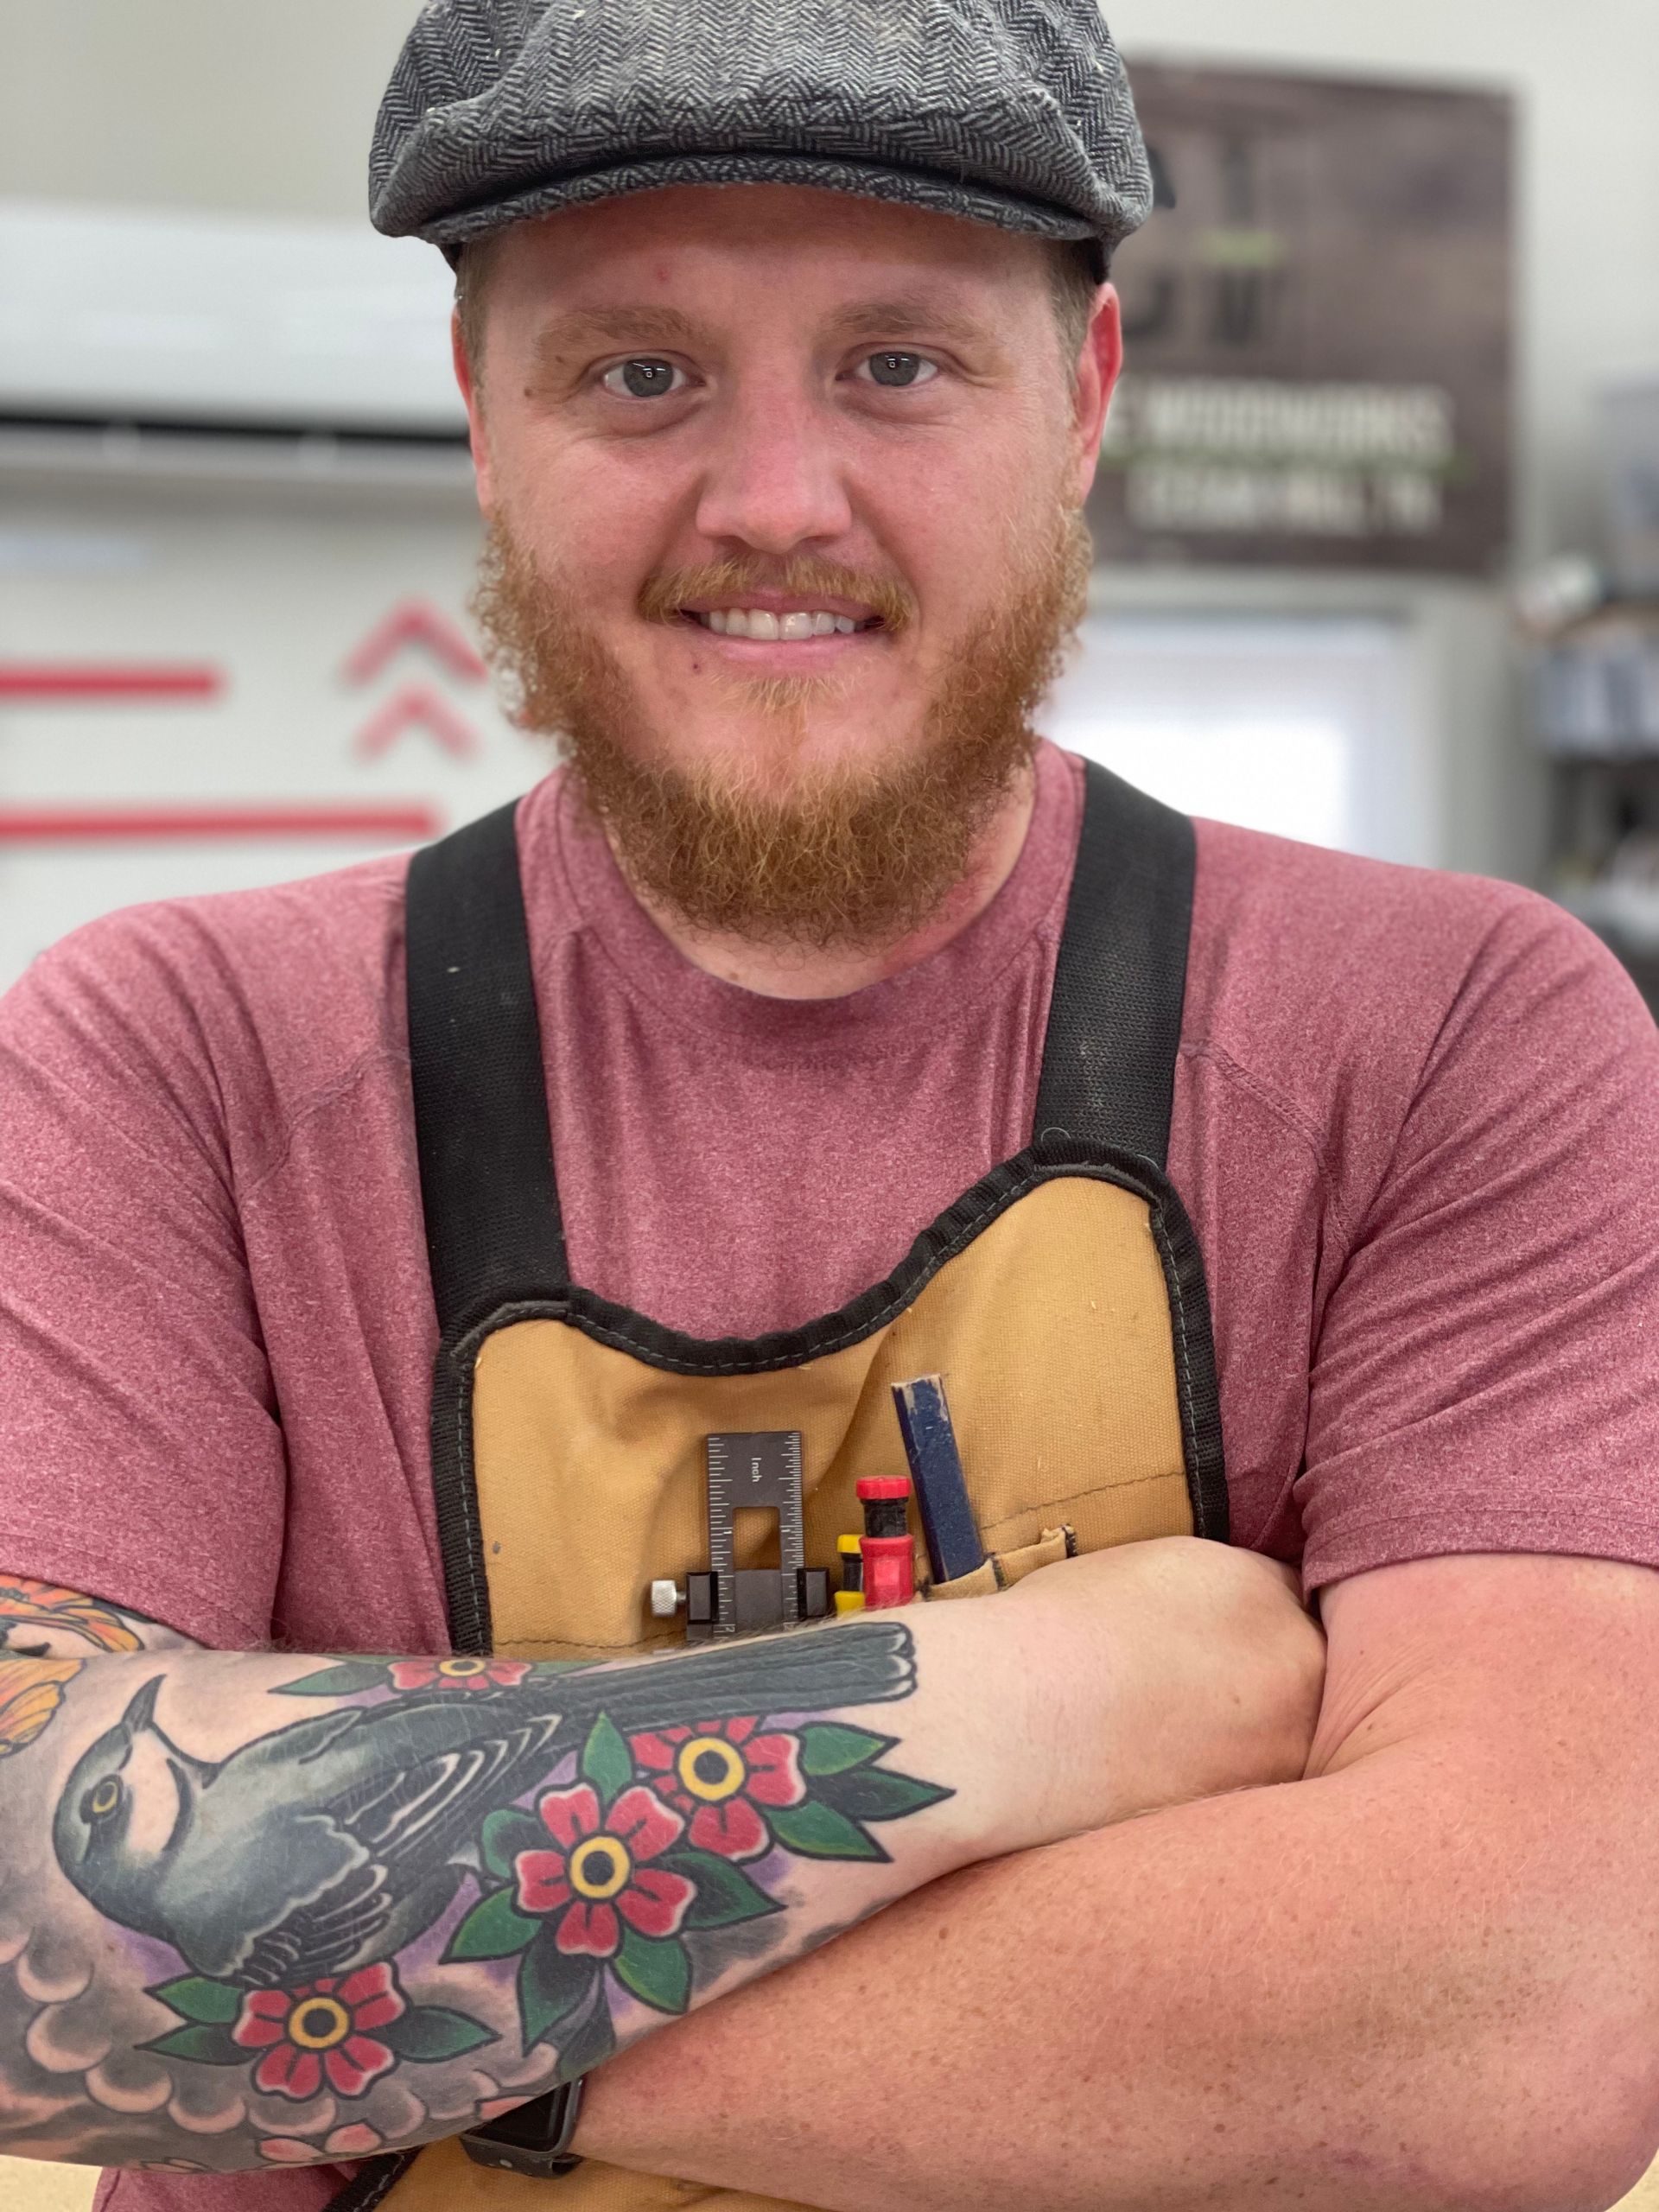 A man with a beard and a tattoo on his arm is wearing a hat and apron.